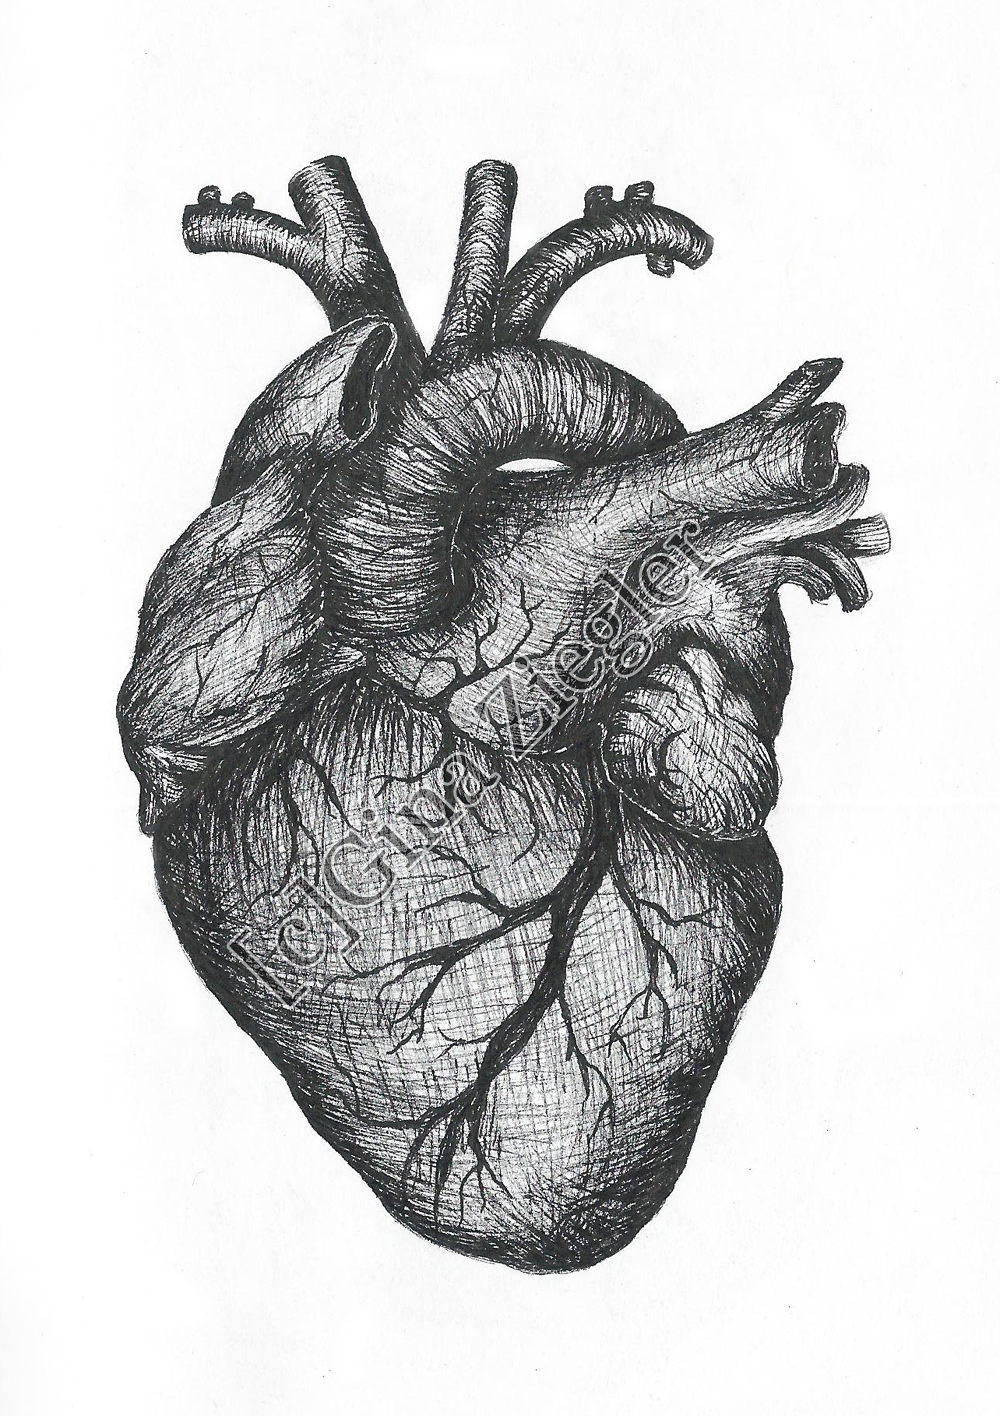 Real Heart Drawing | Clipart Panda - Free Clipart Images